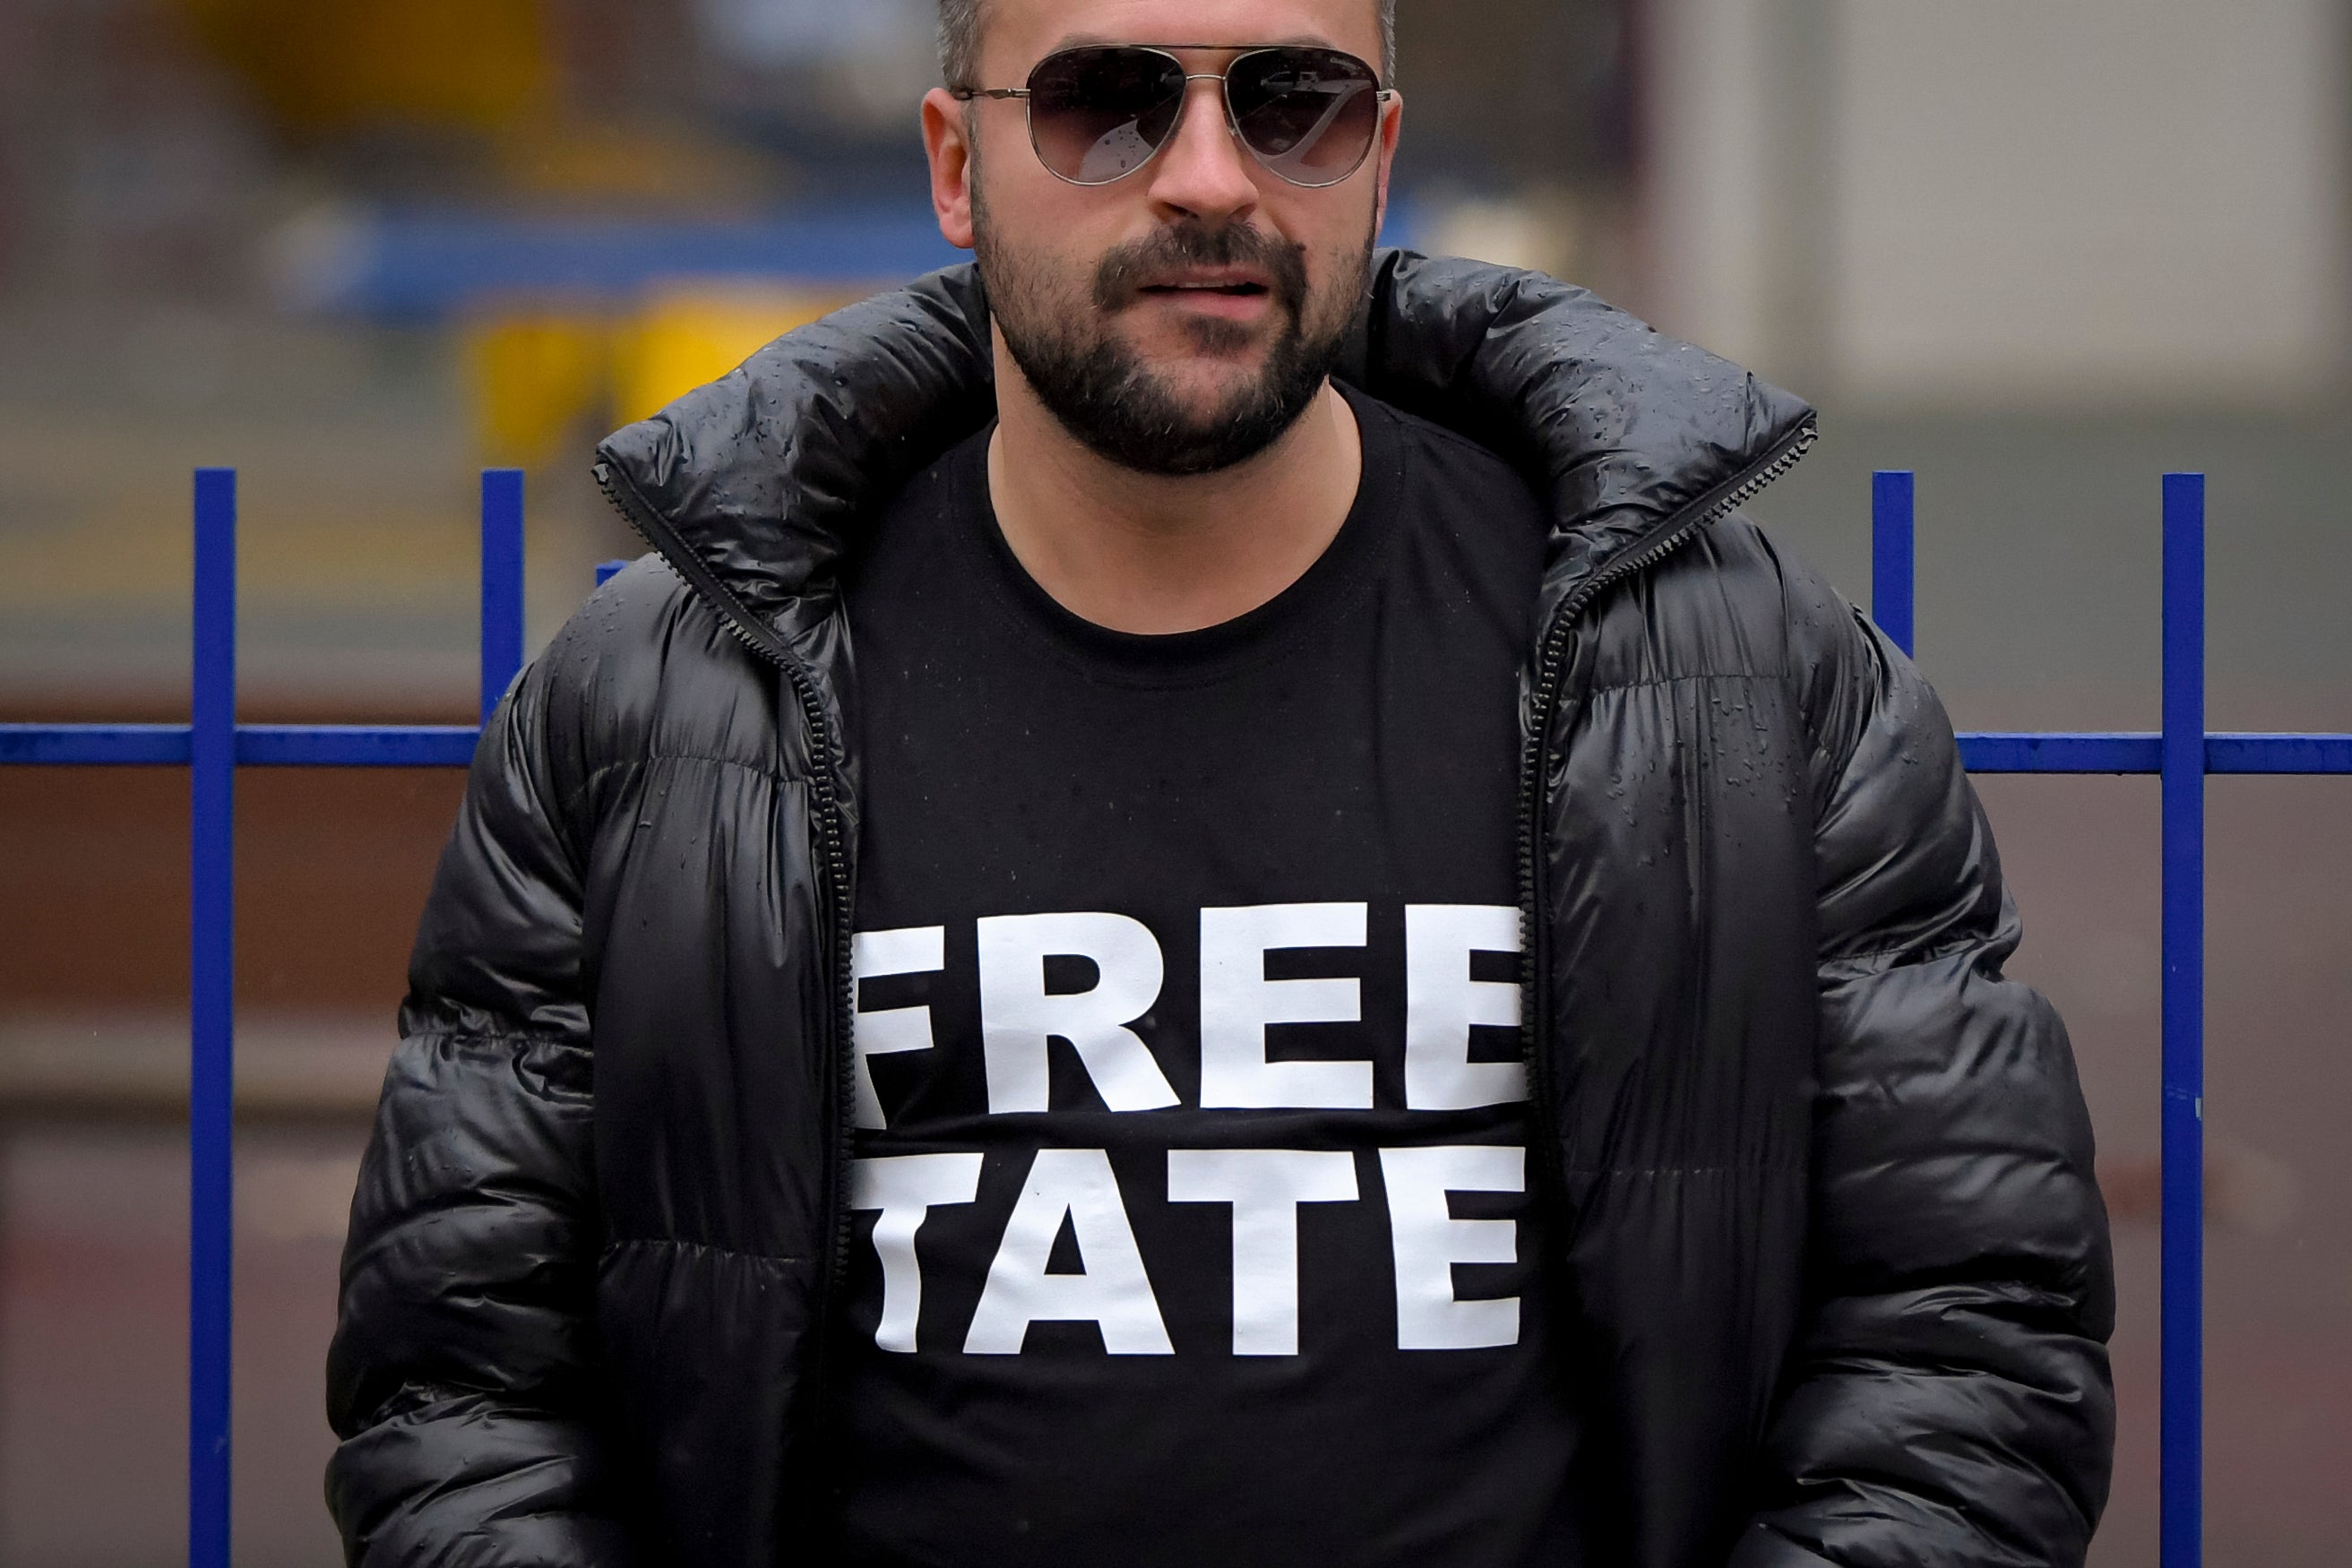 A Tate supporter stands outside court during the hearings